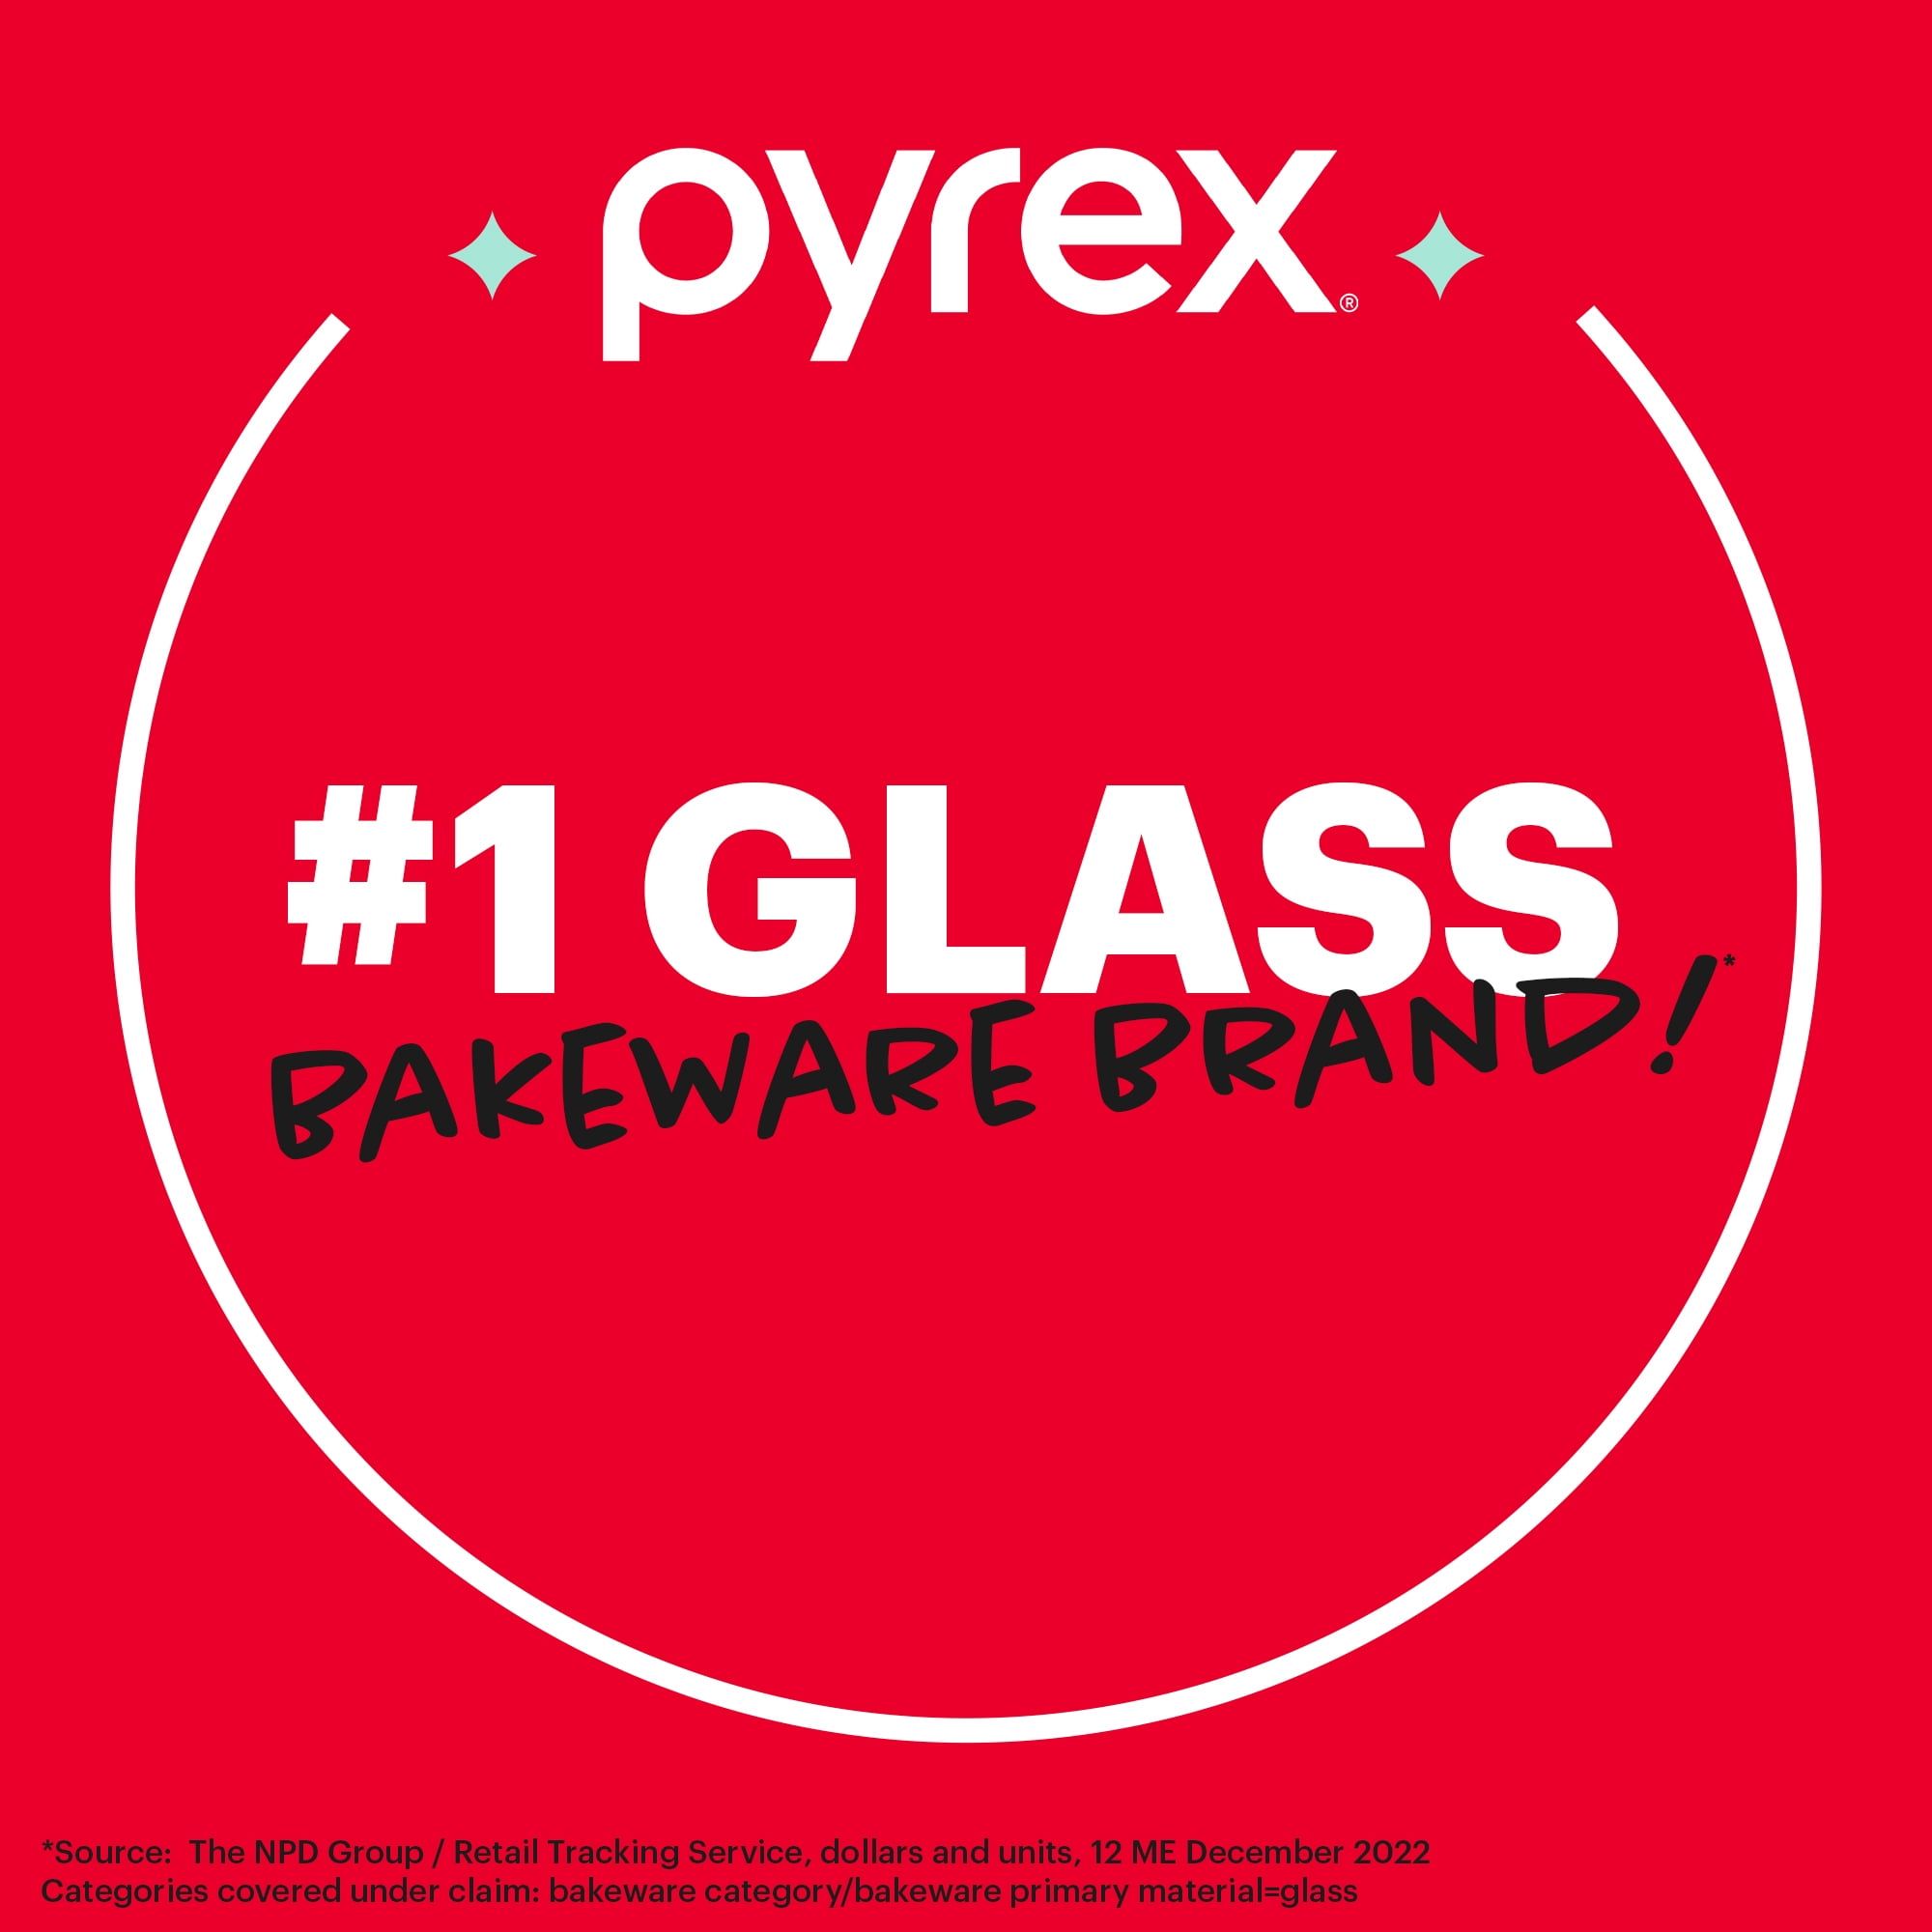 Pyrex 4 Piece Glass Measuring Cup Set, Includes 1-Cup, 2-Cup, 4-Cup, and 8- Cup Tempered Glass Liquid Measuring Cups, Dishwasher, Freezer, Microwave,  and Preheat…